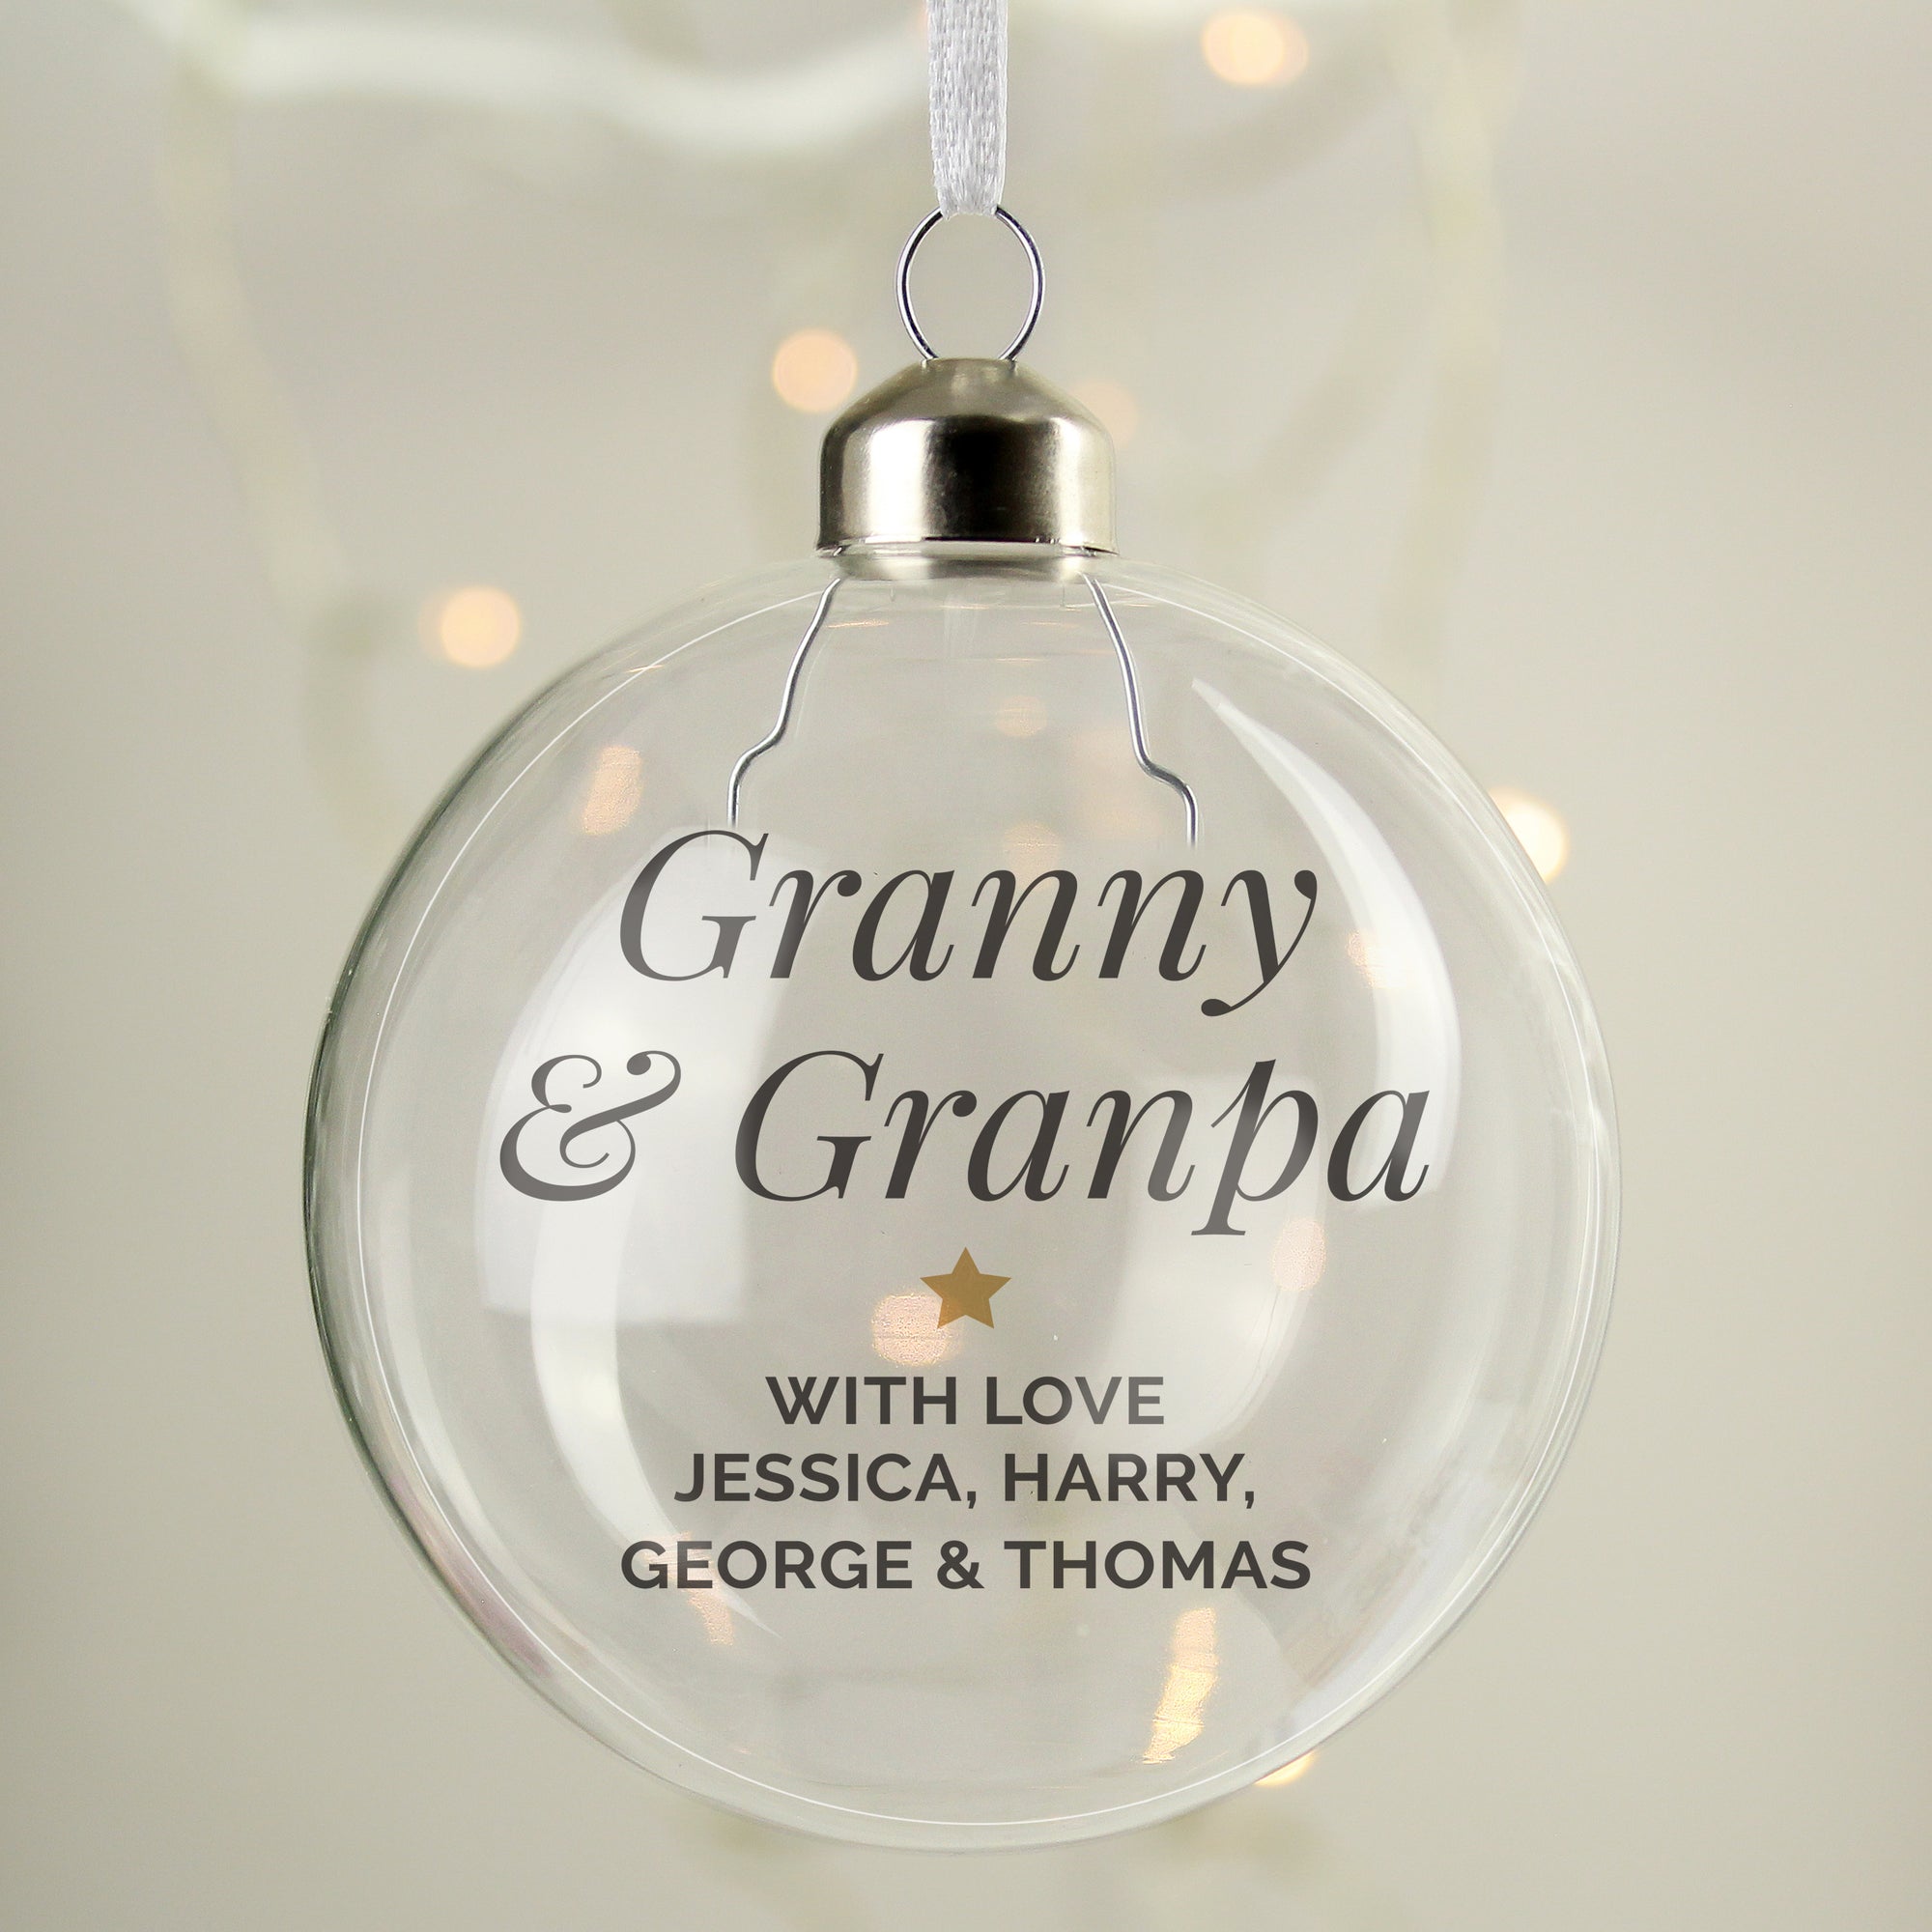 Image of a clear glass Christmas bauble that can be personalised with your own message over up to 5 lines.  The first two lines are printed in a large italic font and remaining lines will be printed in a smaller uppercase font.  Lines 2 and 3 are separated by a small gold star.